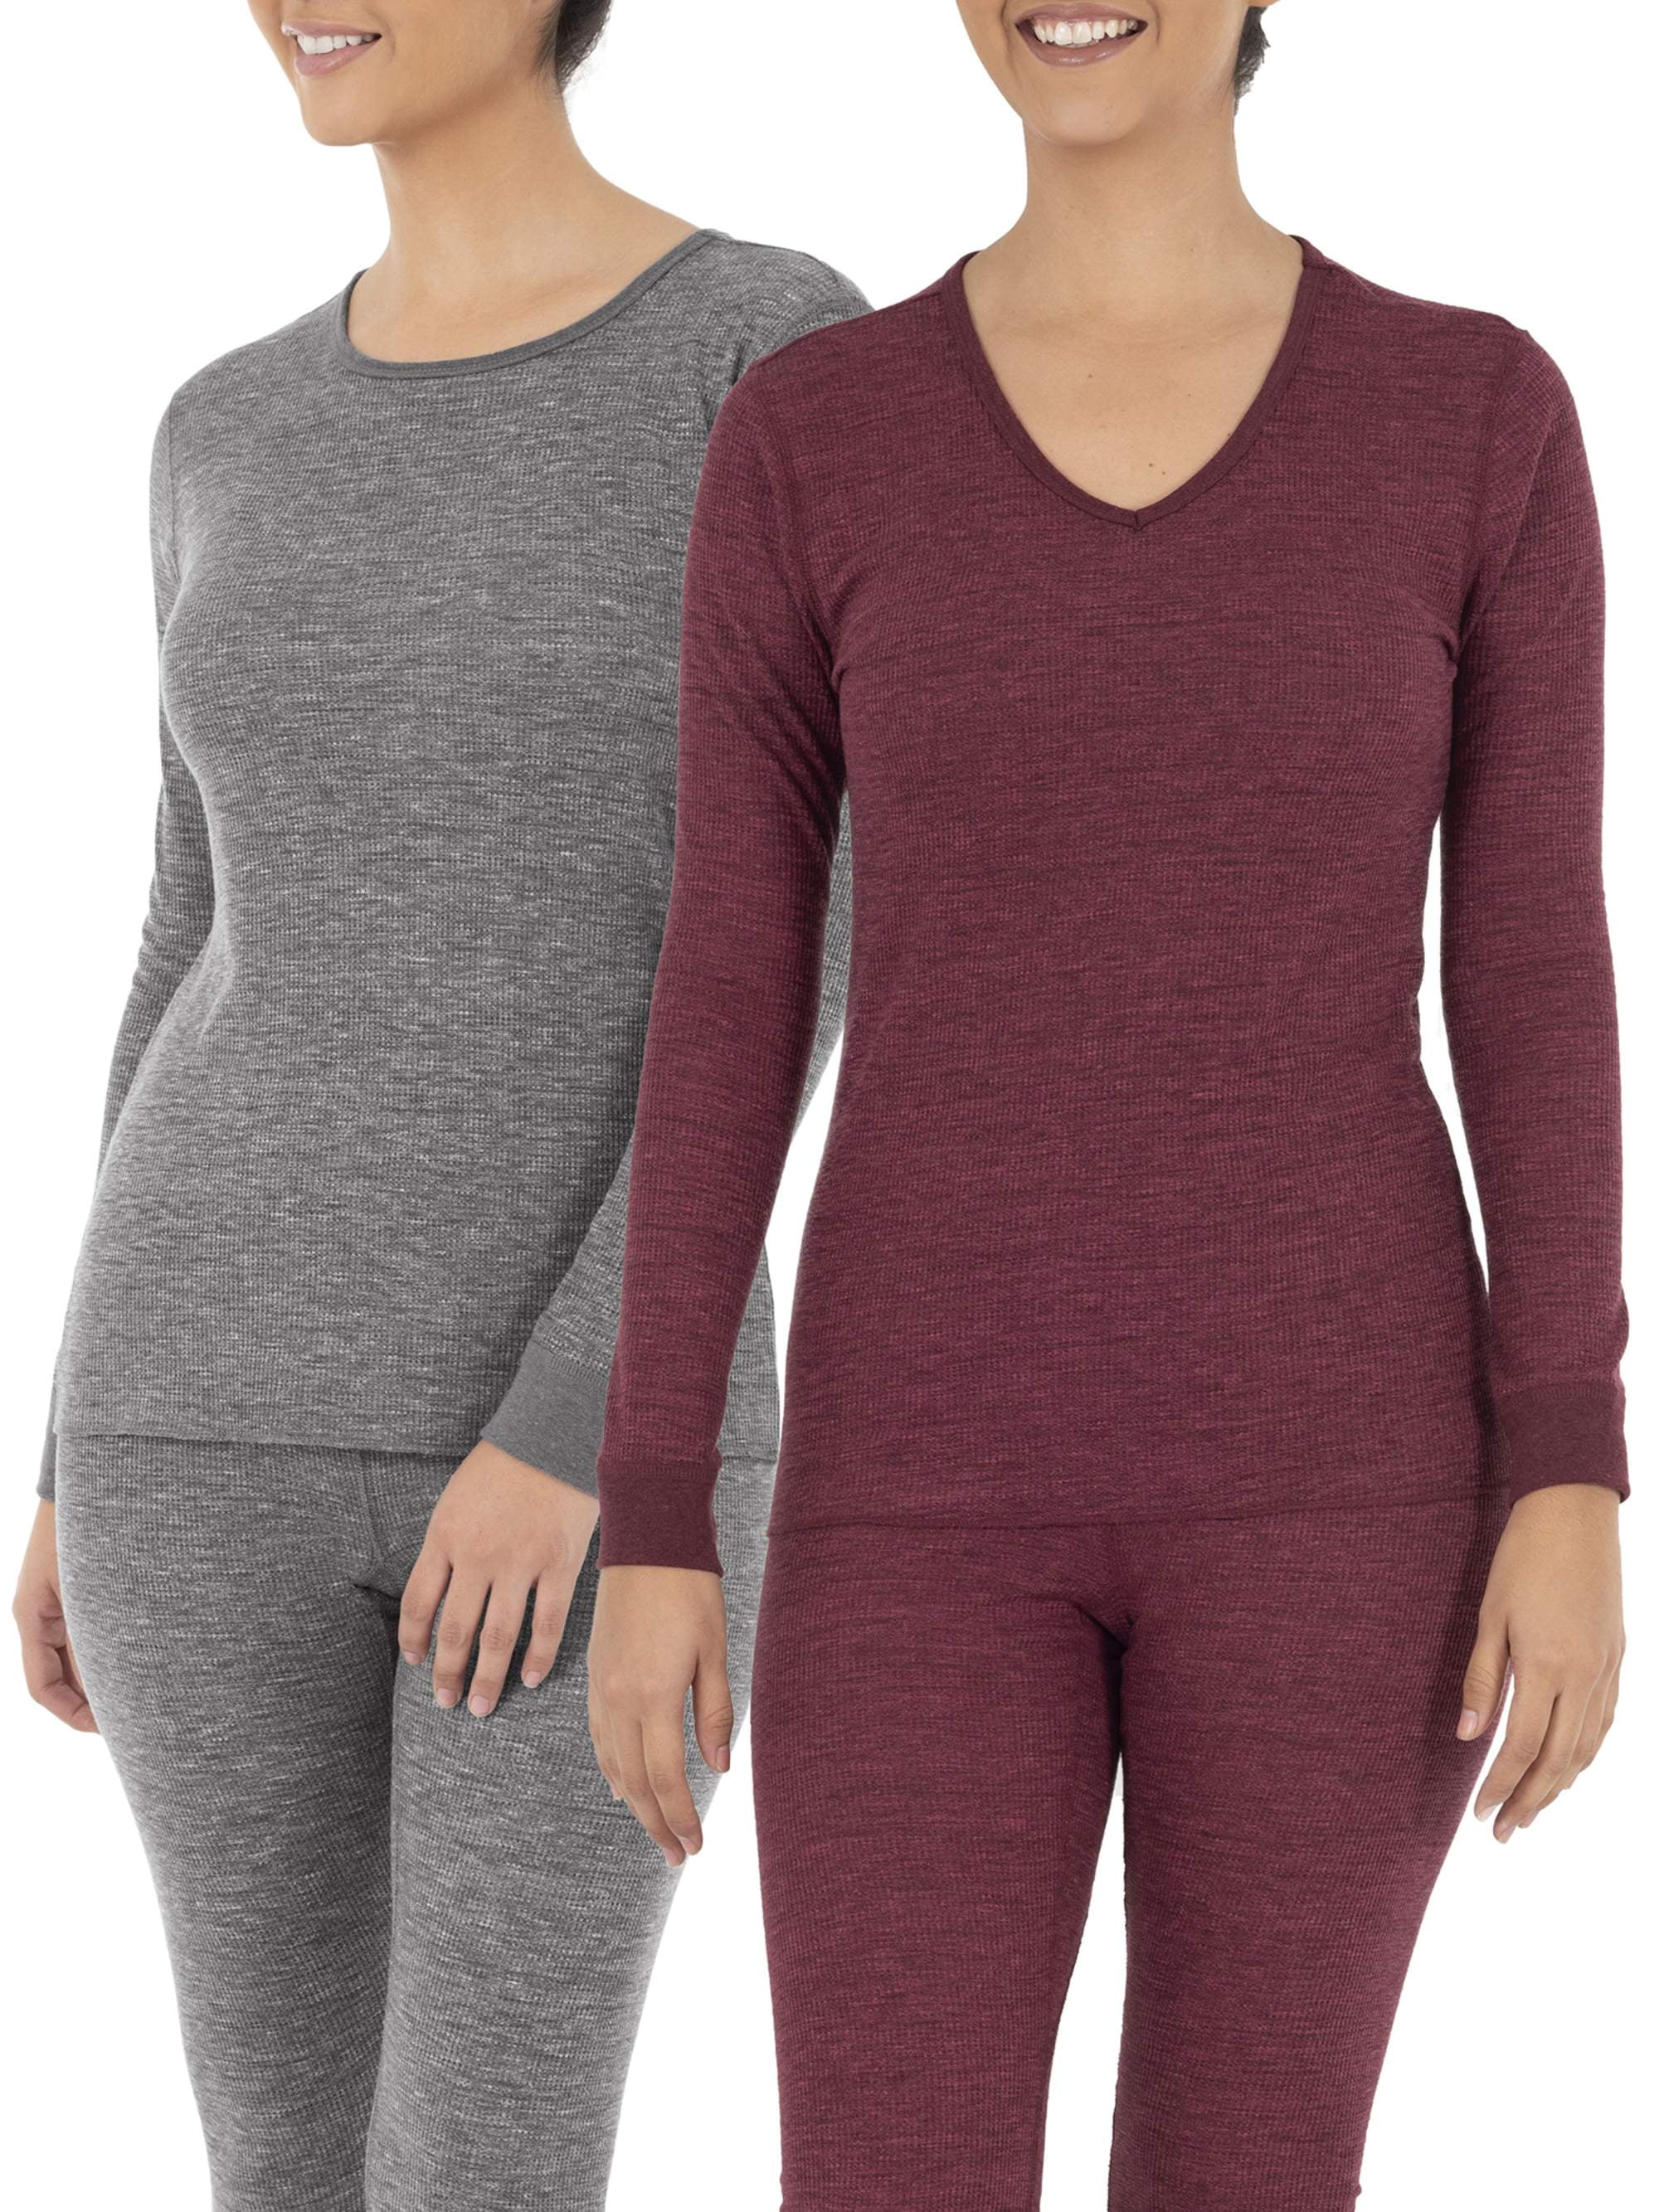 Fruit of the Loom Womens Thermal Waffle Top 